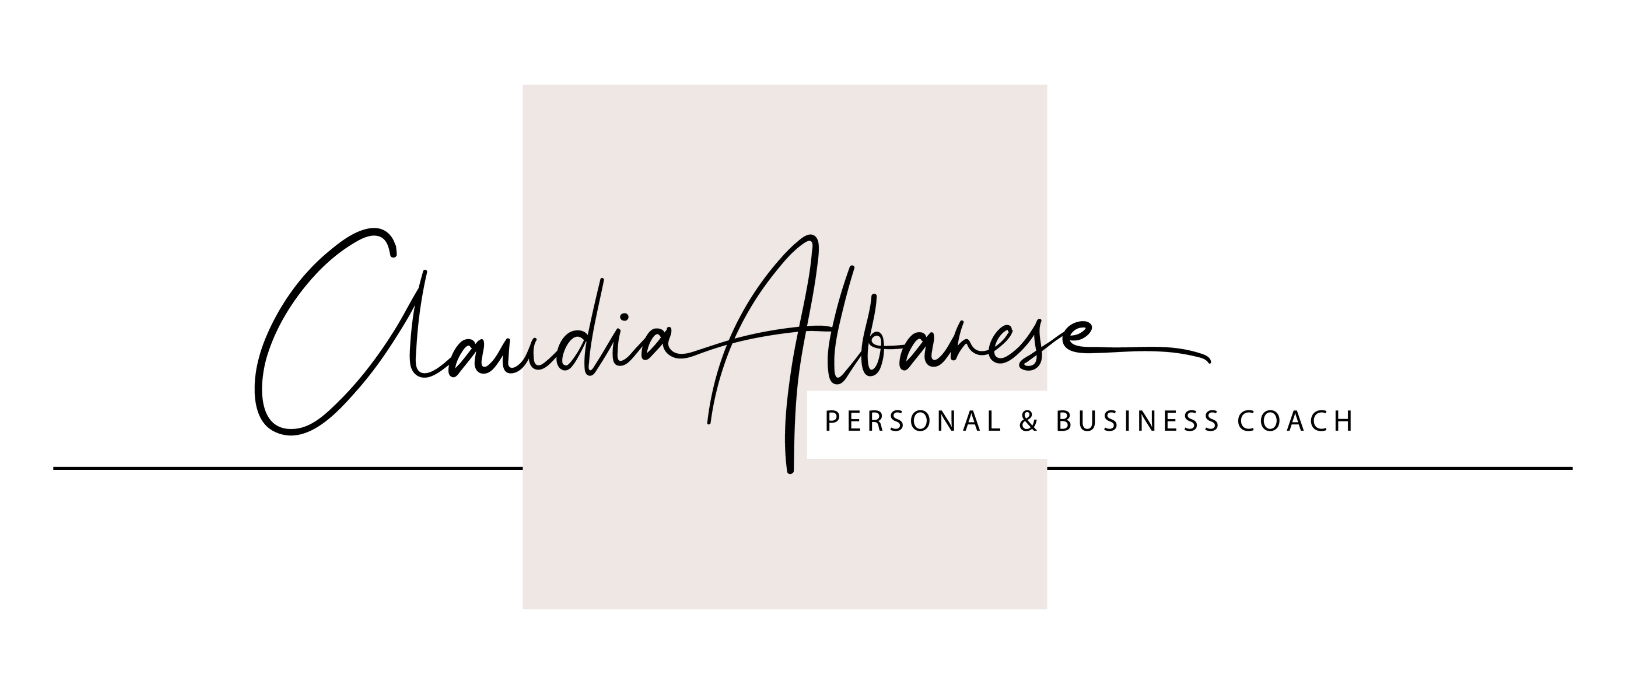 Claudia Albanese Personal & Business Coach